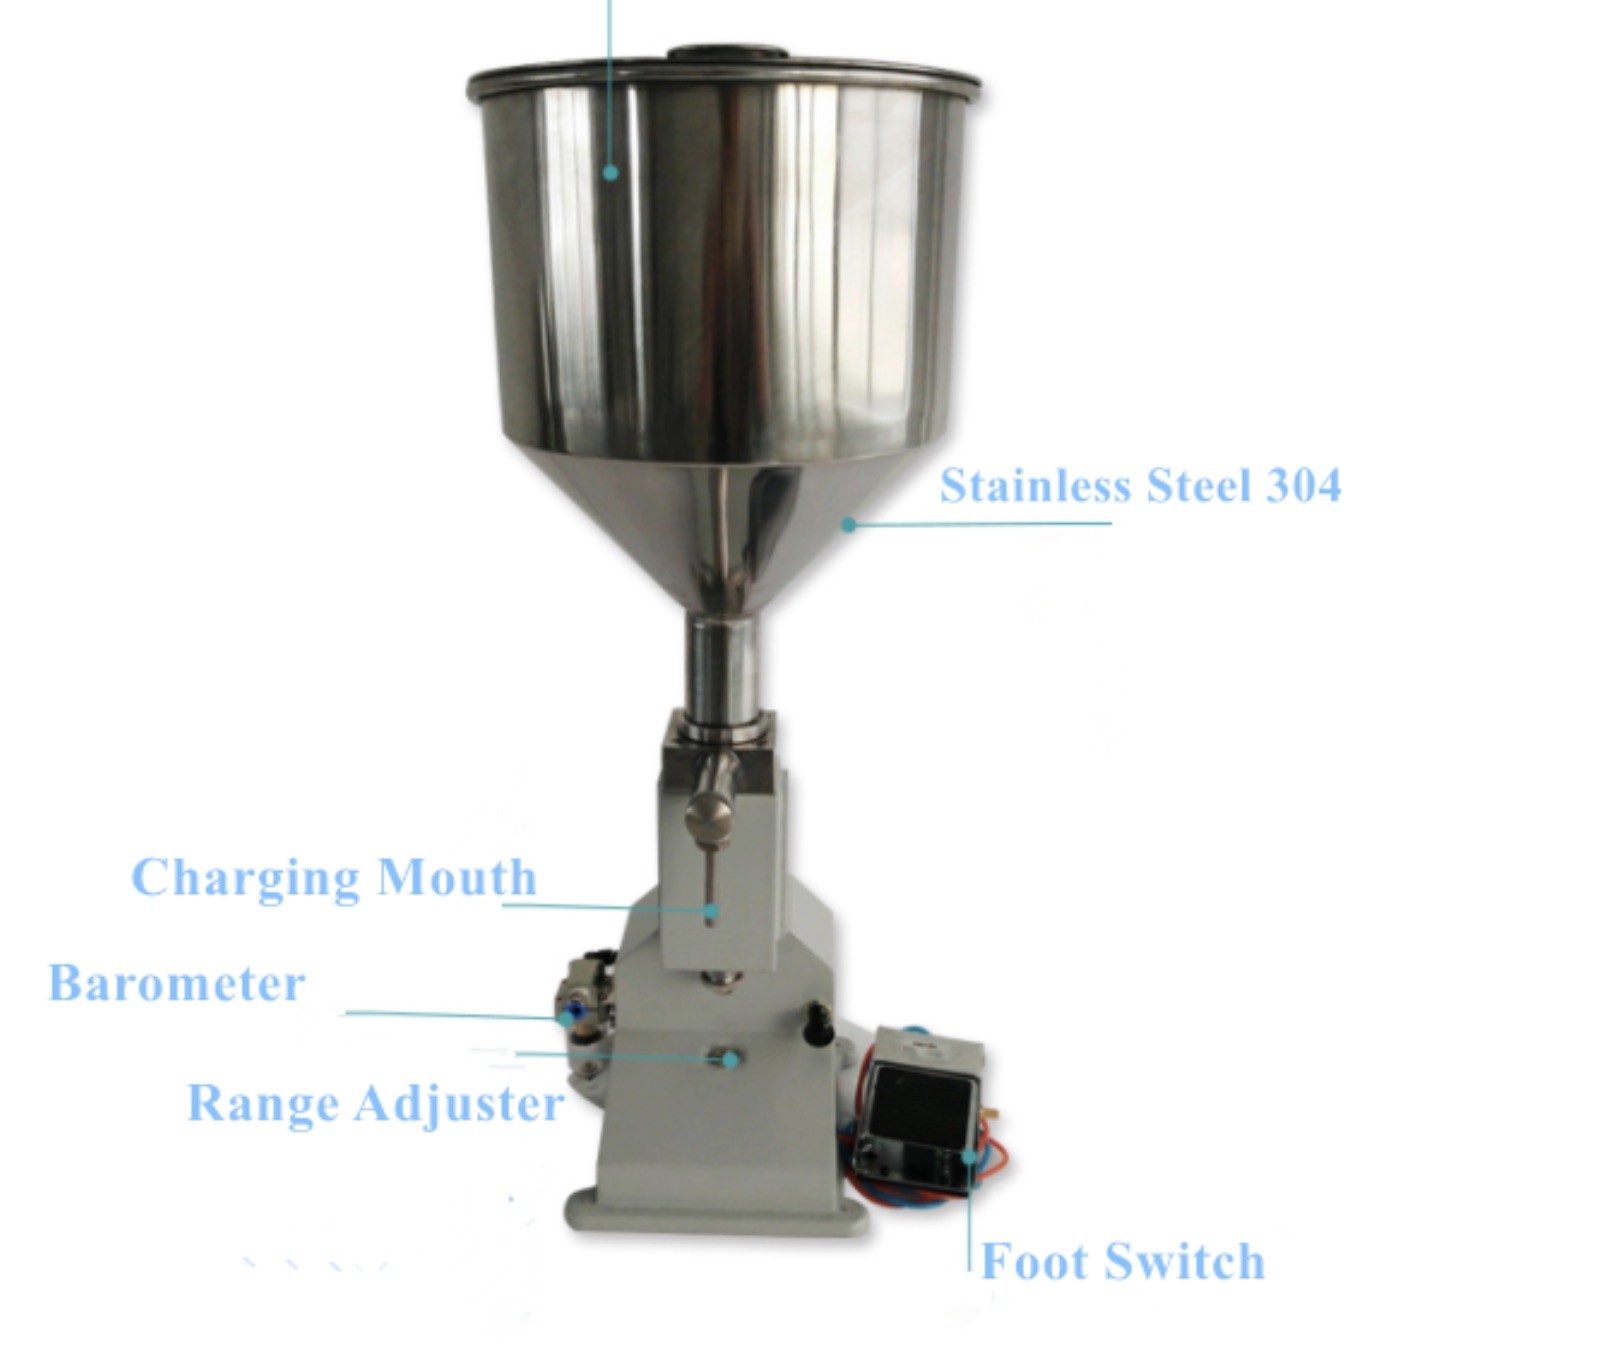 water bag filling machines - accupacking